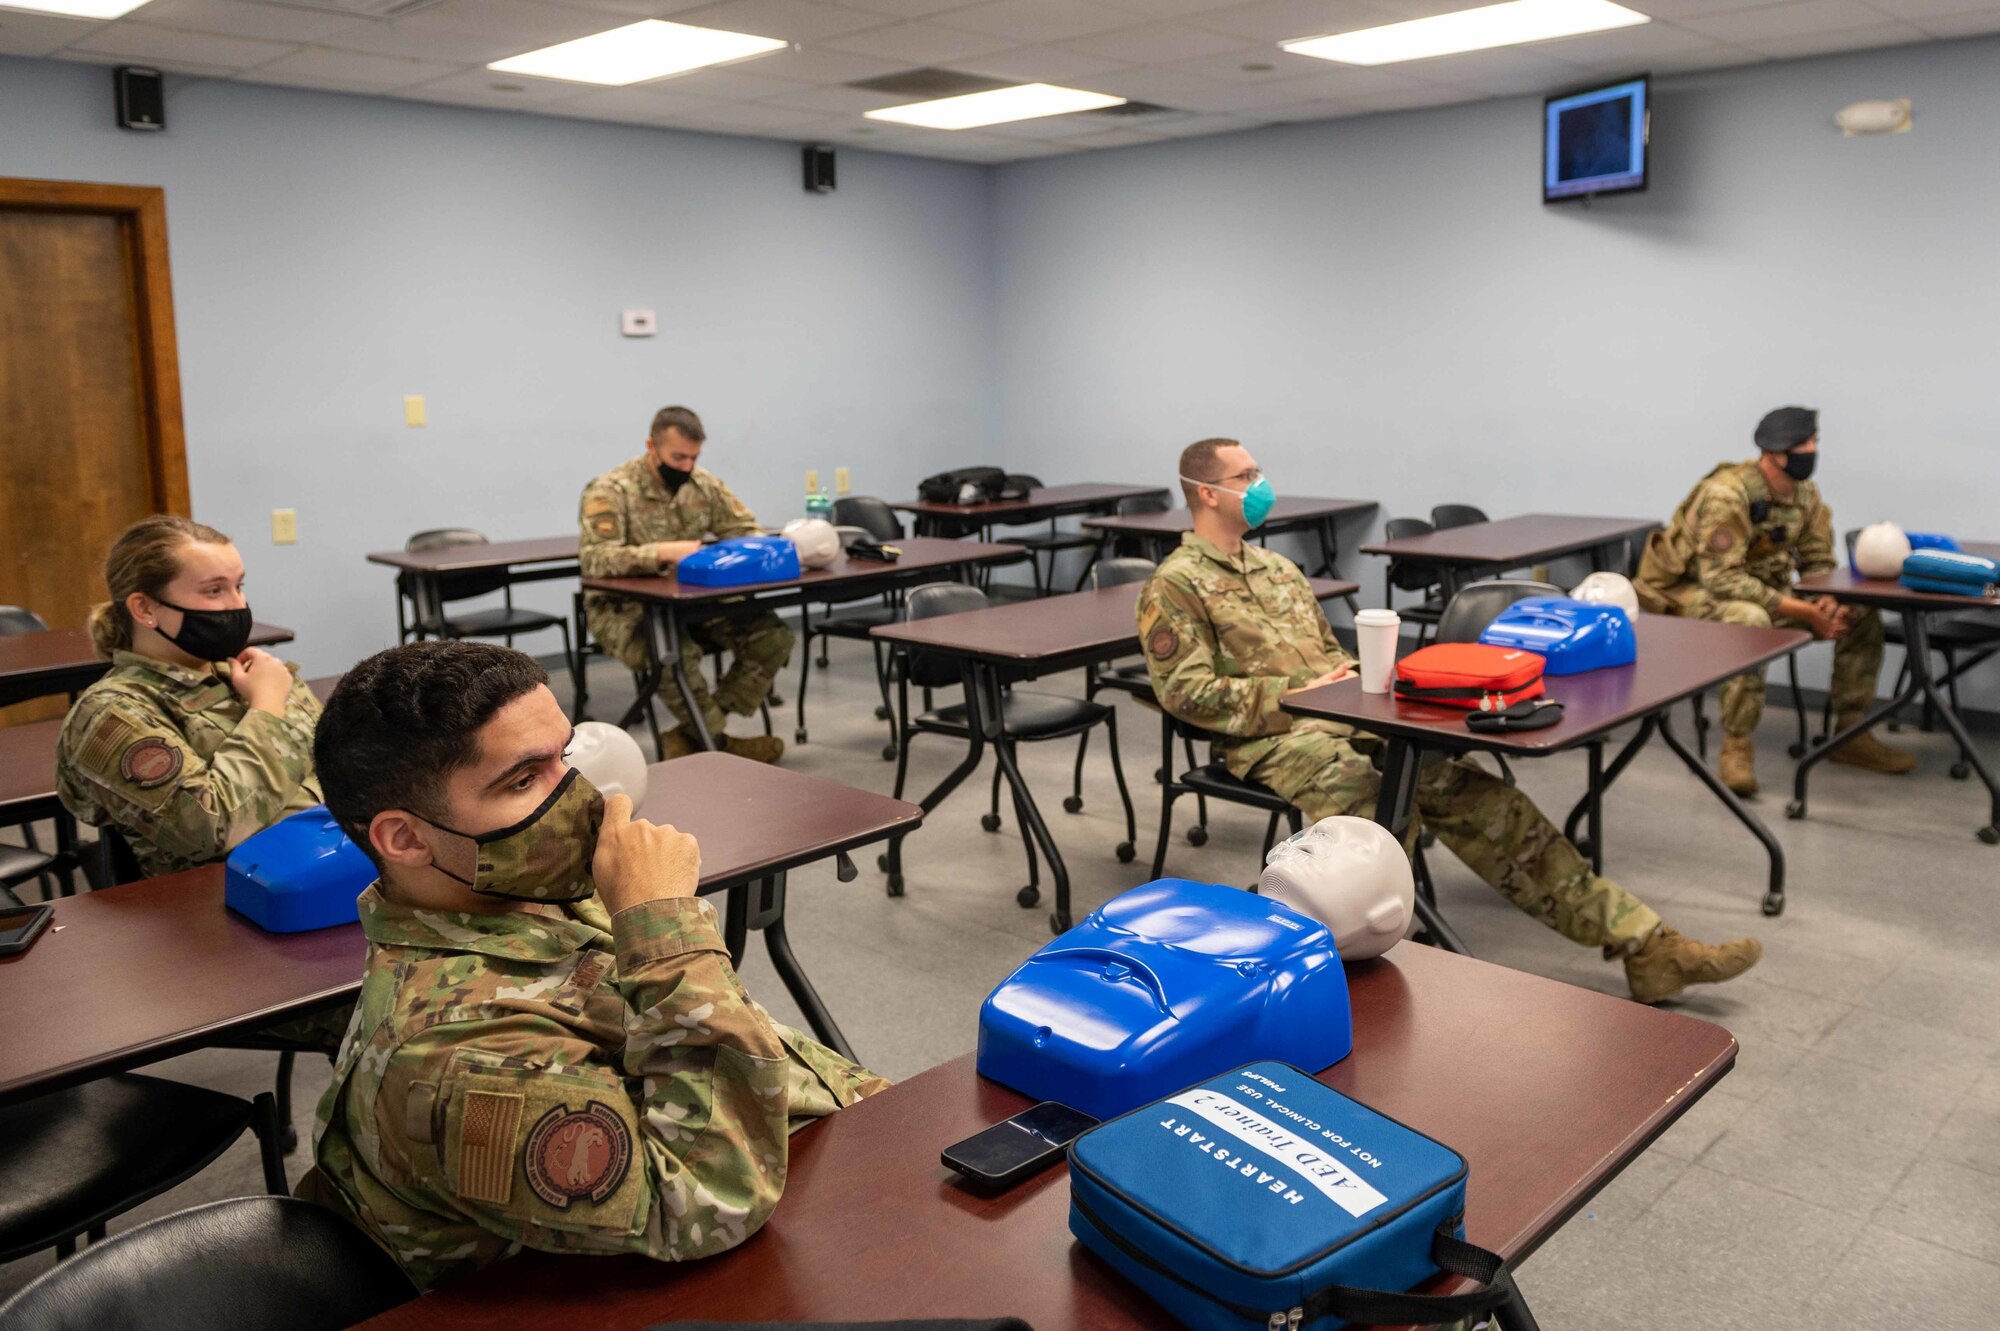 Members of the 4th Security Forces Squadron attend a CPR certification class at Seymour Johnson Air Force Base, North Carolina, Nov. 9, 2021. A total of six airmen attended the course. (U.S. Air Force photo by Airmen 1st Class Sabrina Fuller)